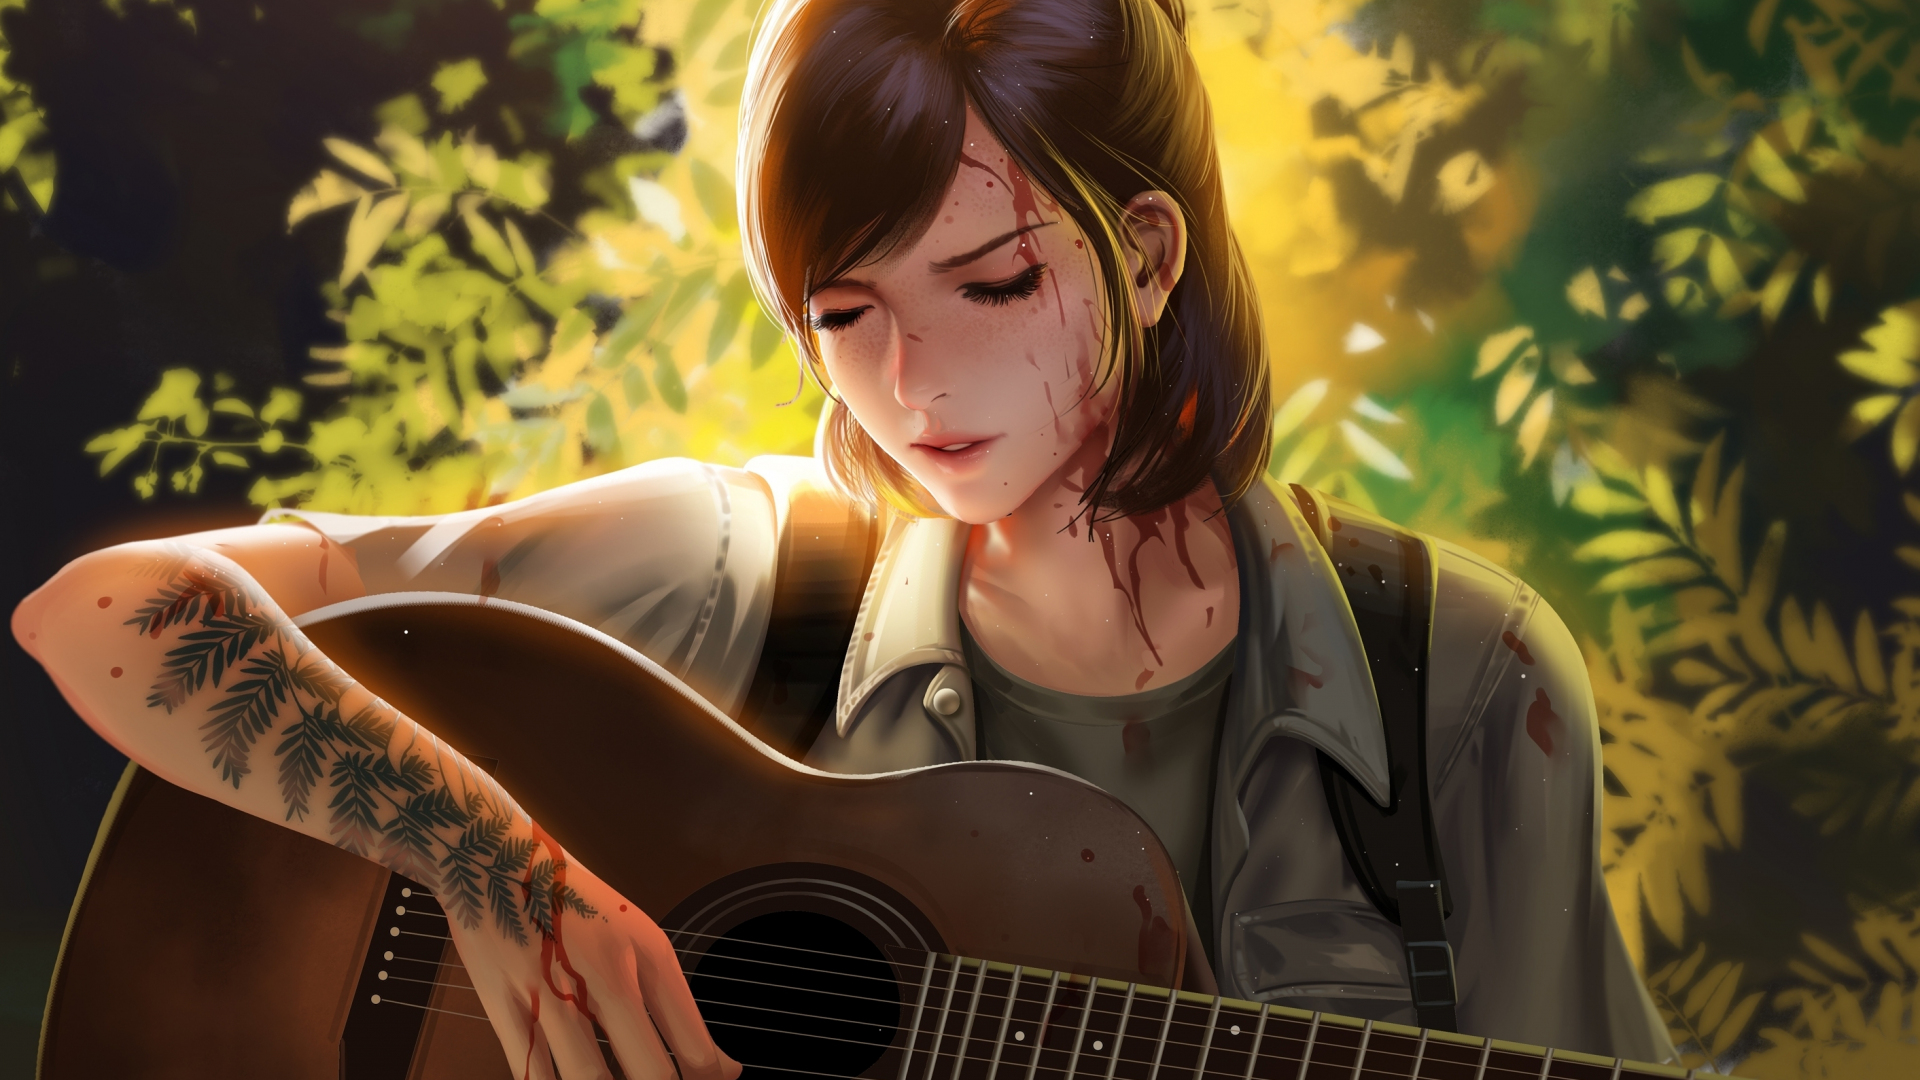 Download wallpaper 1920x1080 ellie, guitar play, the last of us, video game  art, full hd, hdtv, fhd, 1080p wallpaper, 1920x1080 hd background, 25443